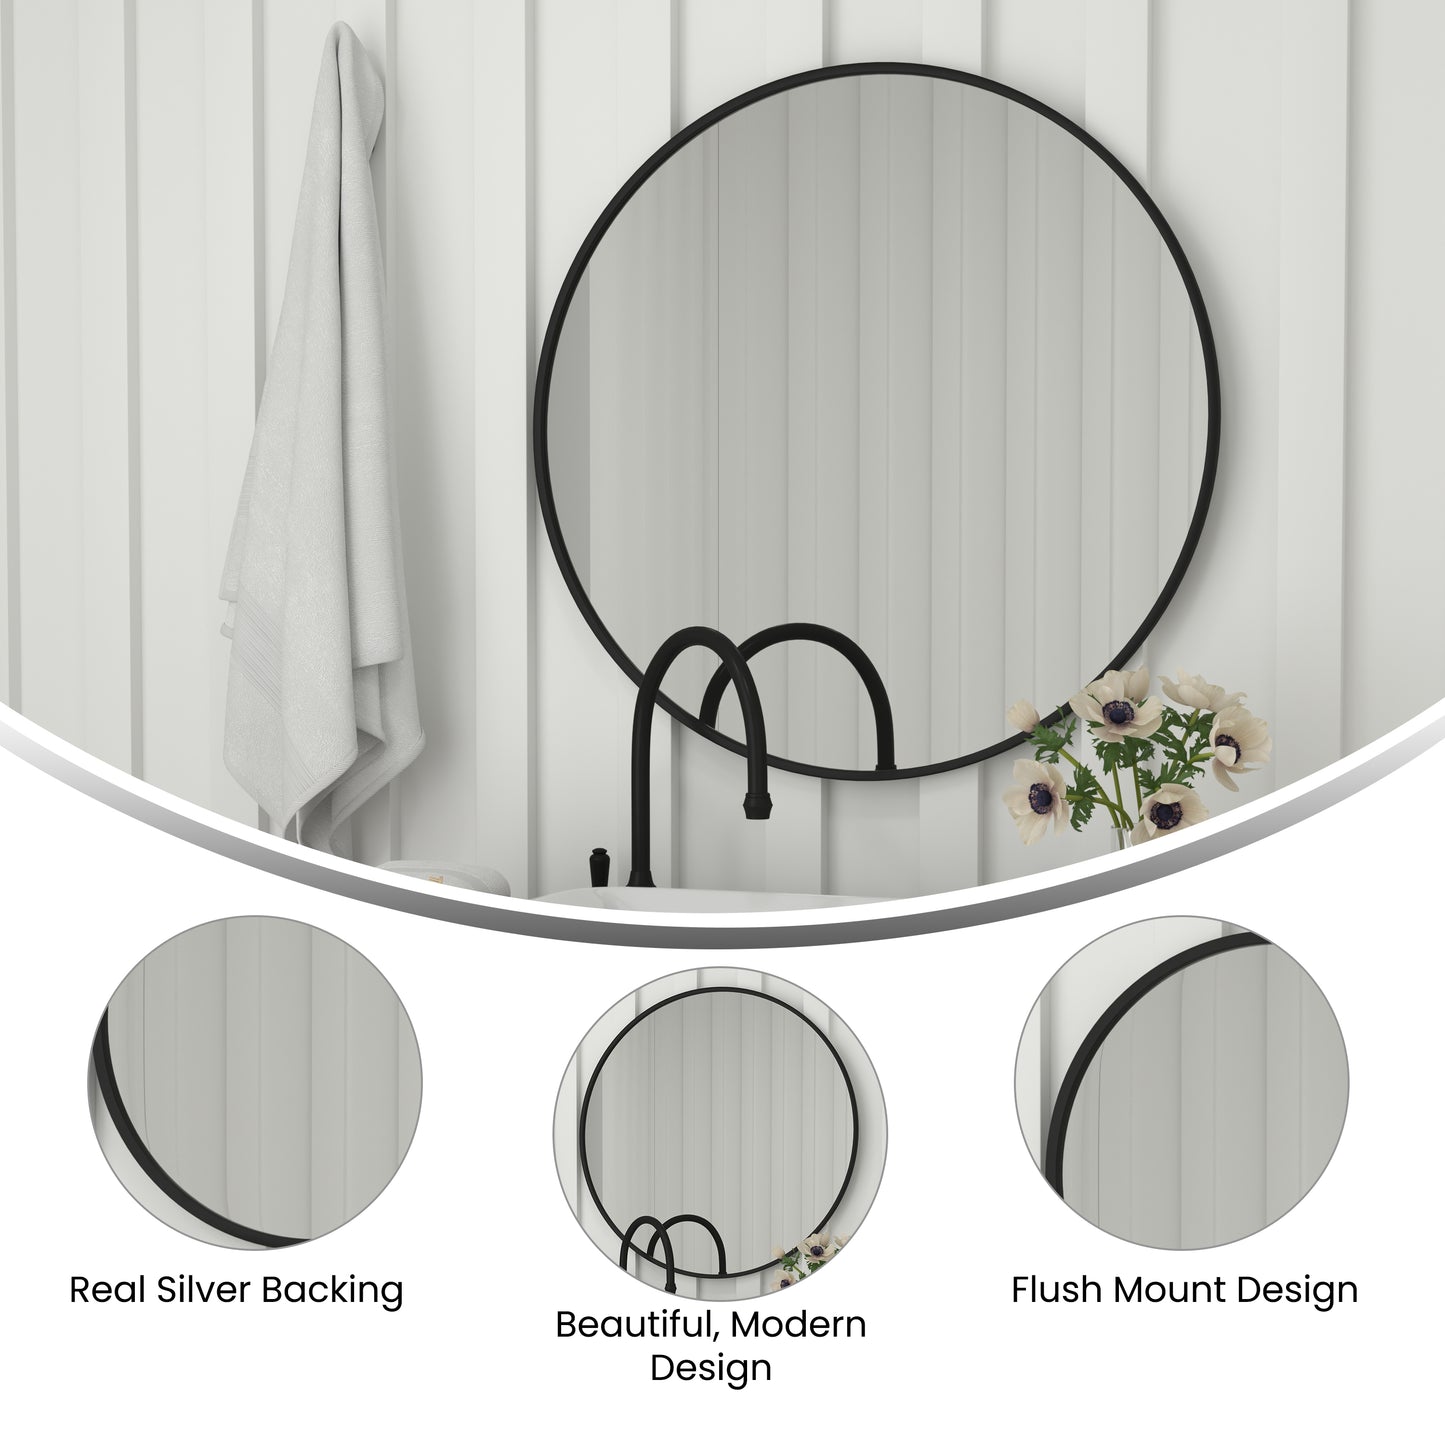 Black 36" Round Wall Mirror HFKHD-6GD-CRE8-091315-GG